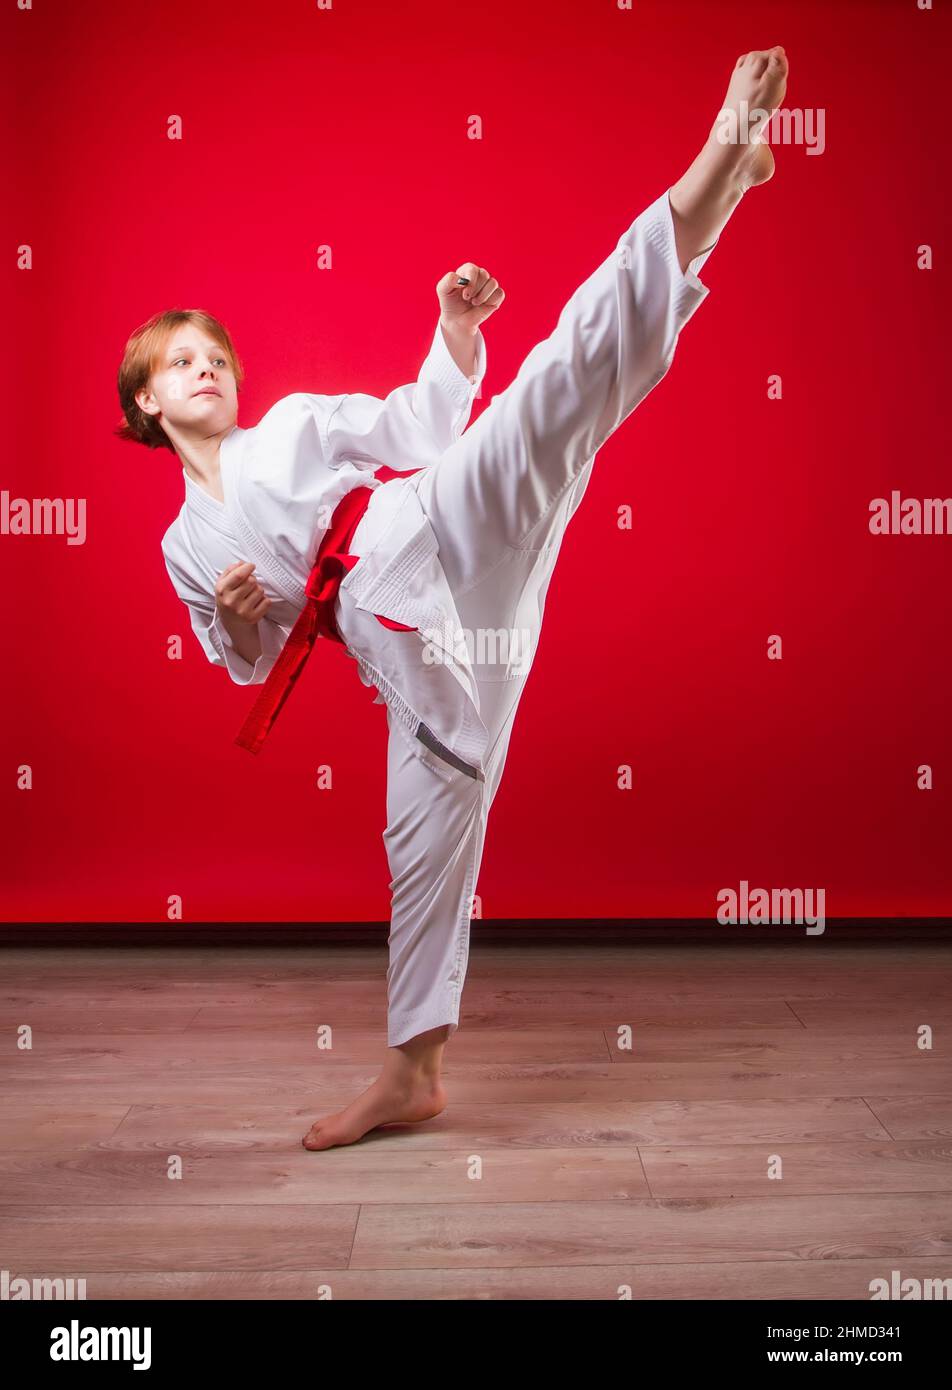 A young girl karateka in a white kimono and a red belt trains and performs a set of exercises on a bright red background Stock Photo